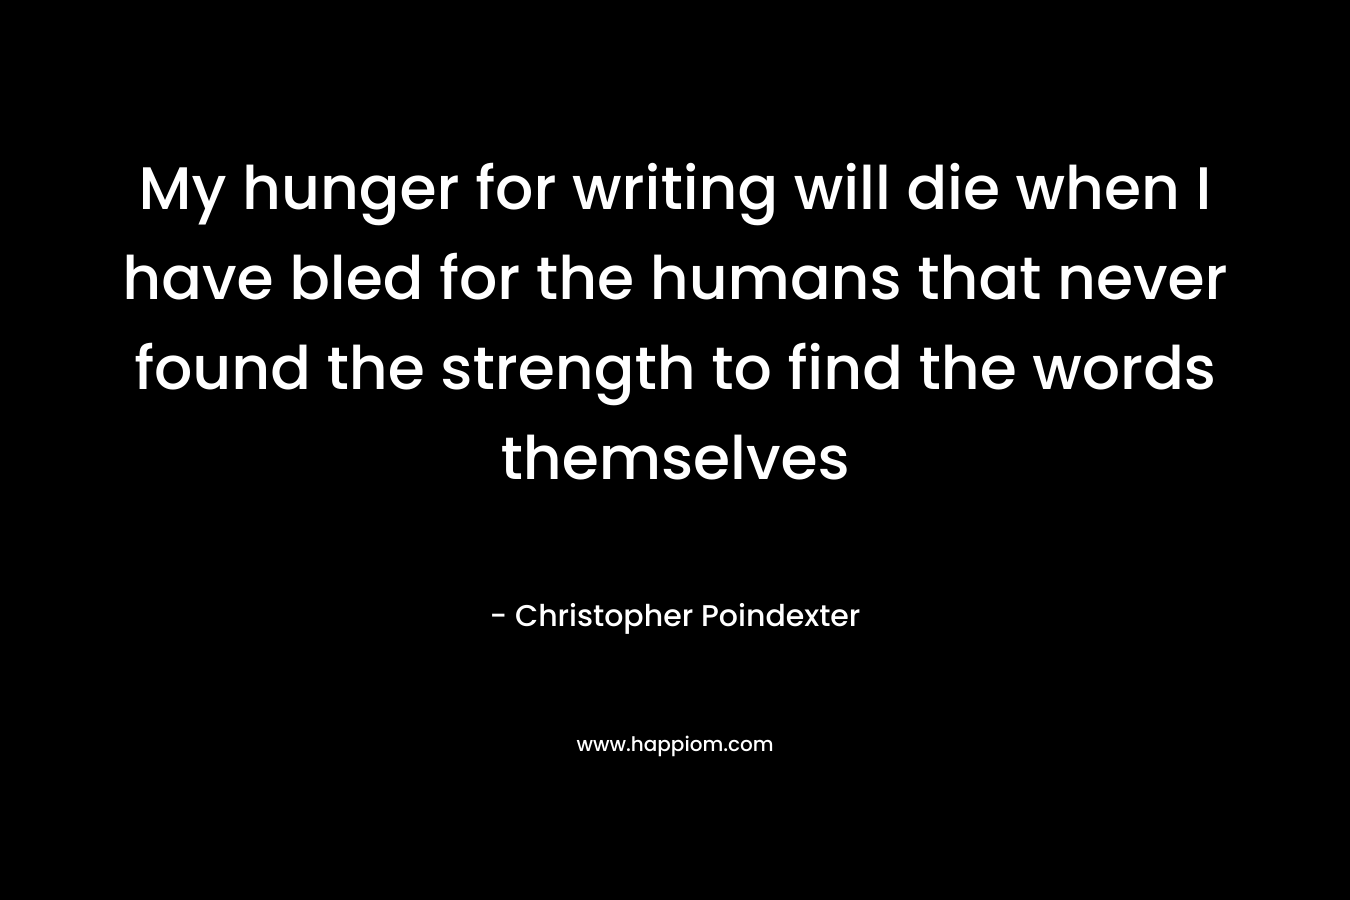 My hunger for writing will die when I have bled for the humans that never found the strength to find the words themselves